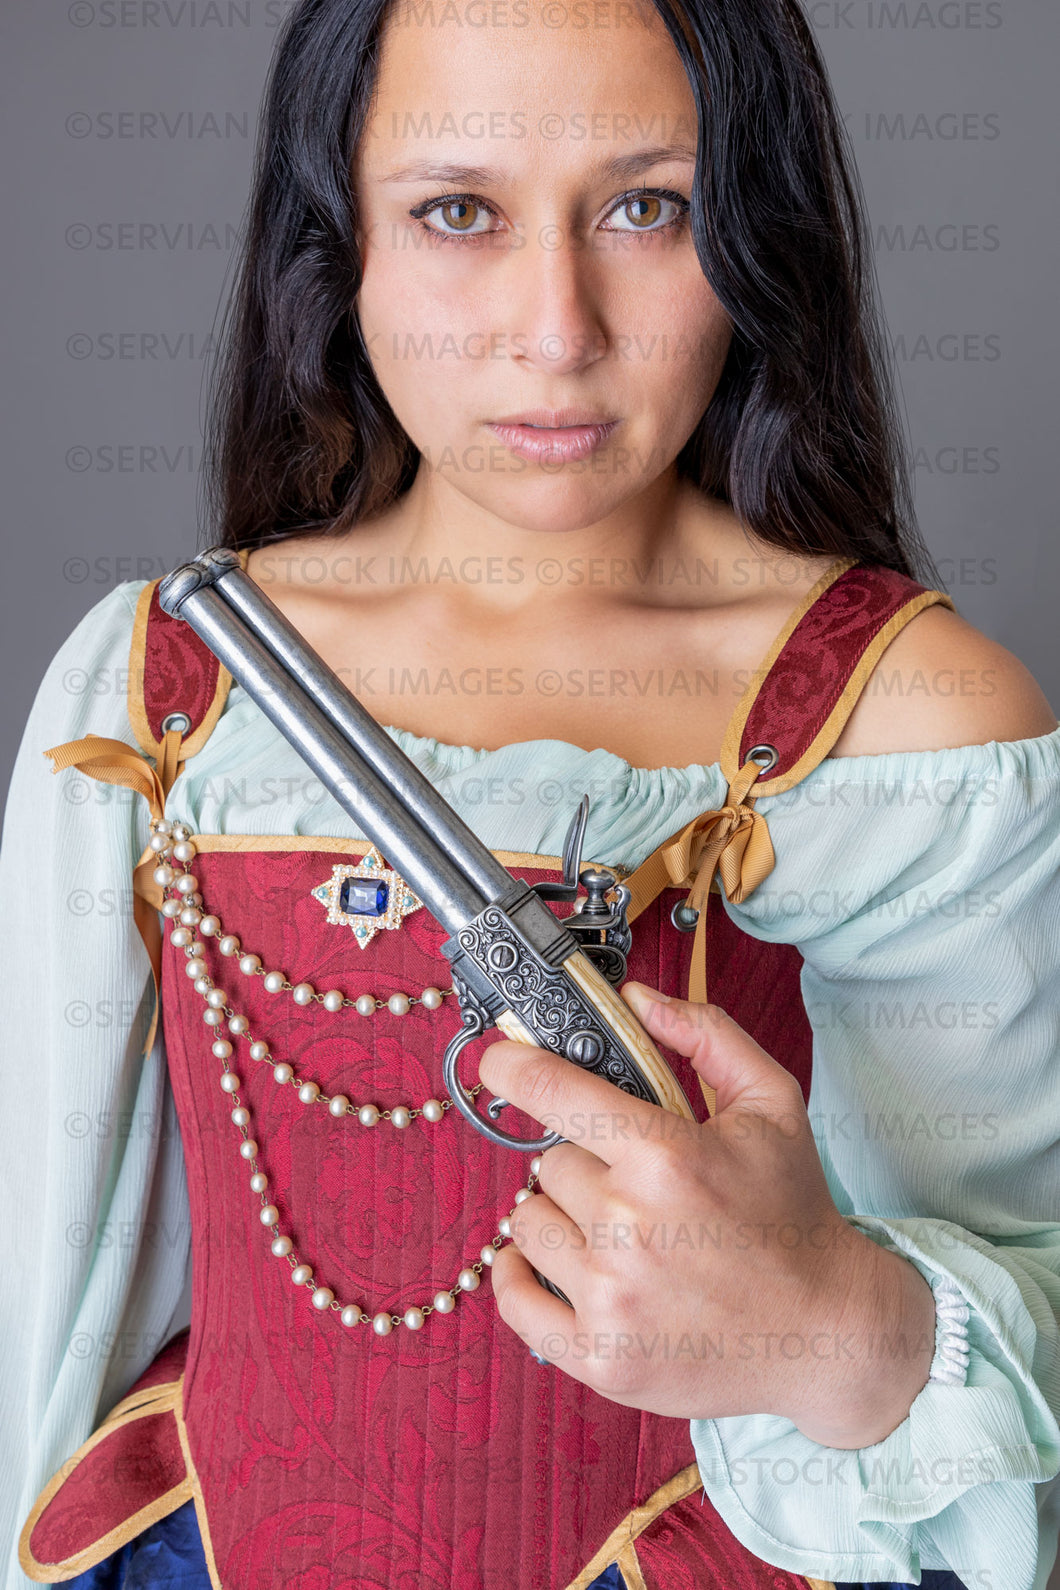 Pirate woman holding a weapon against a grey backdrop (Sylvia 6053)